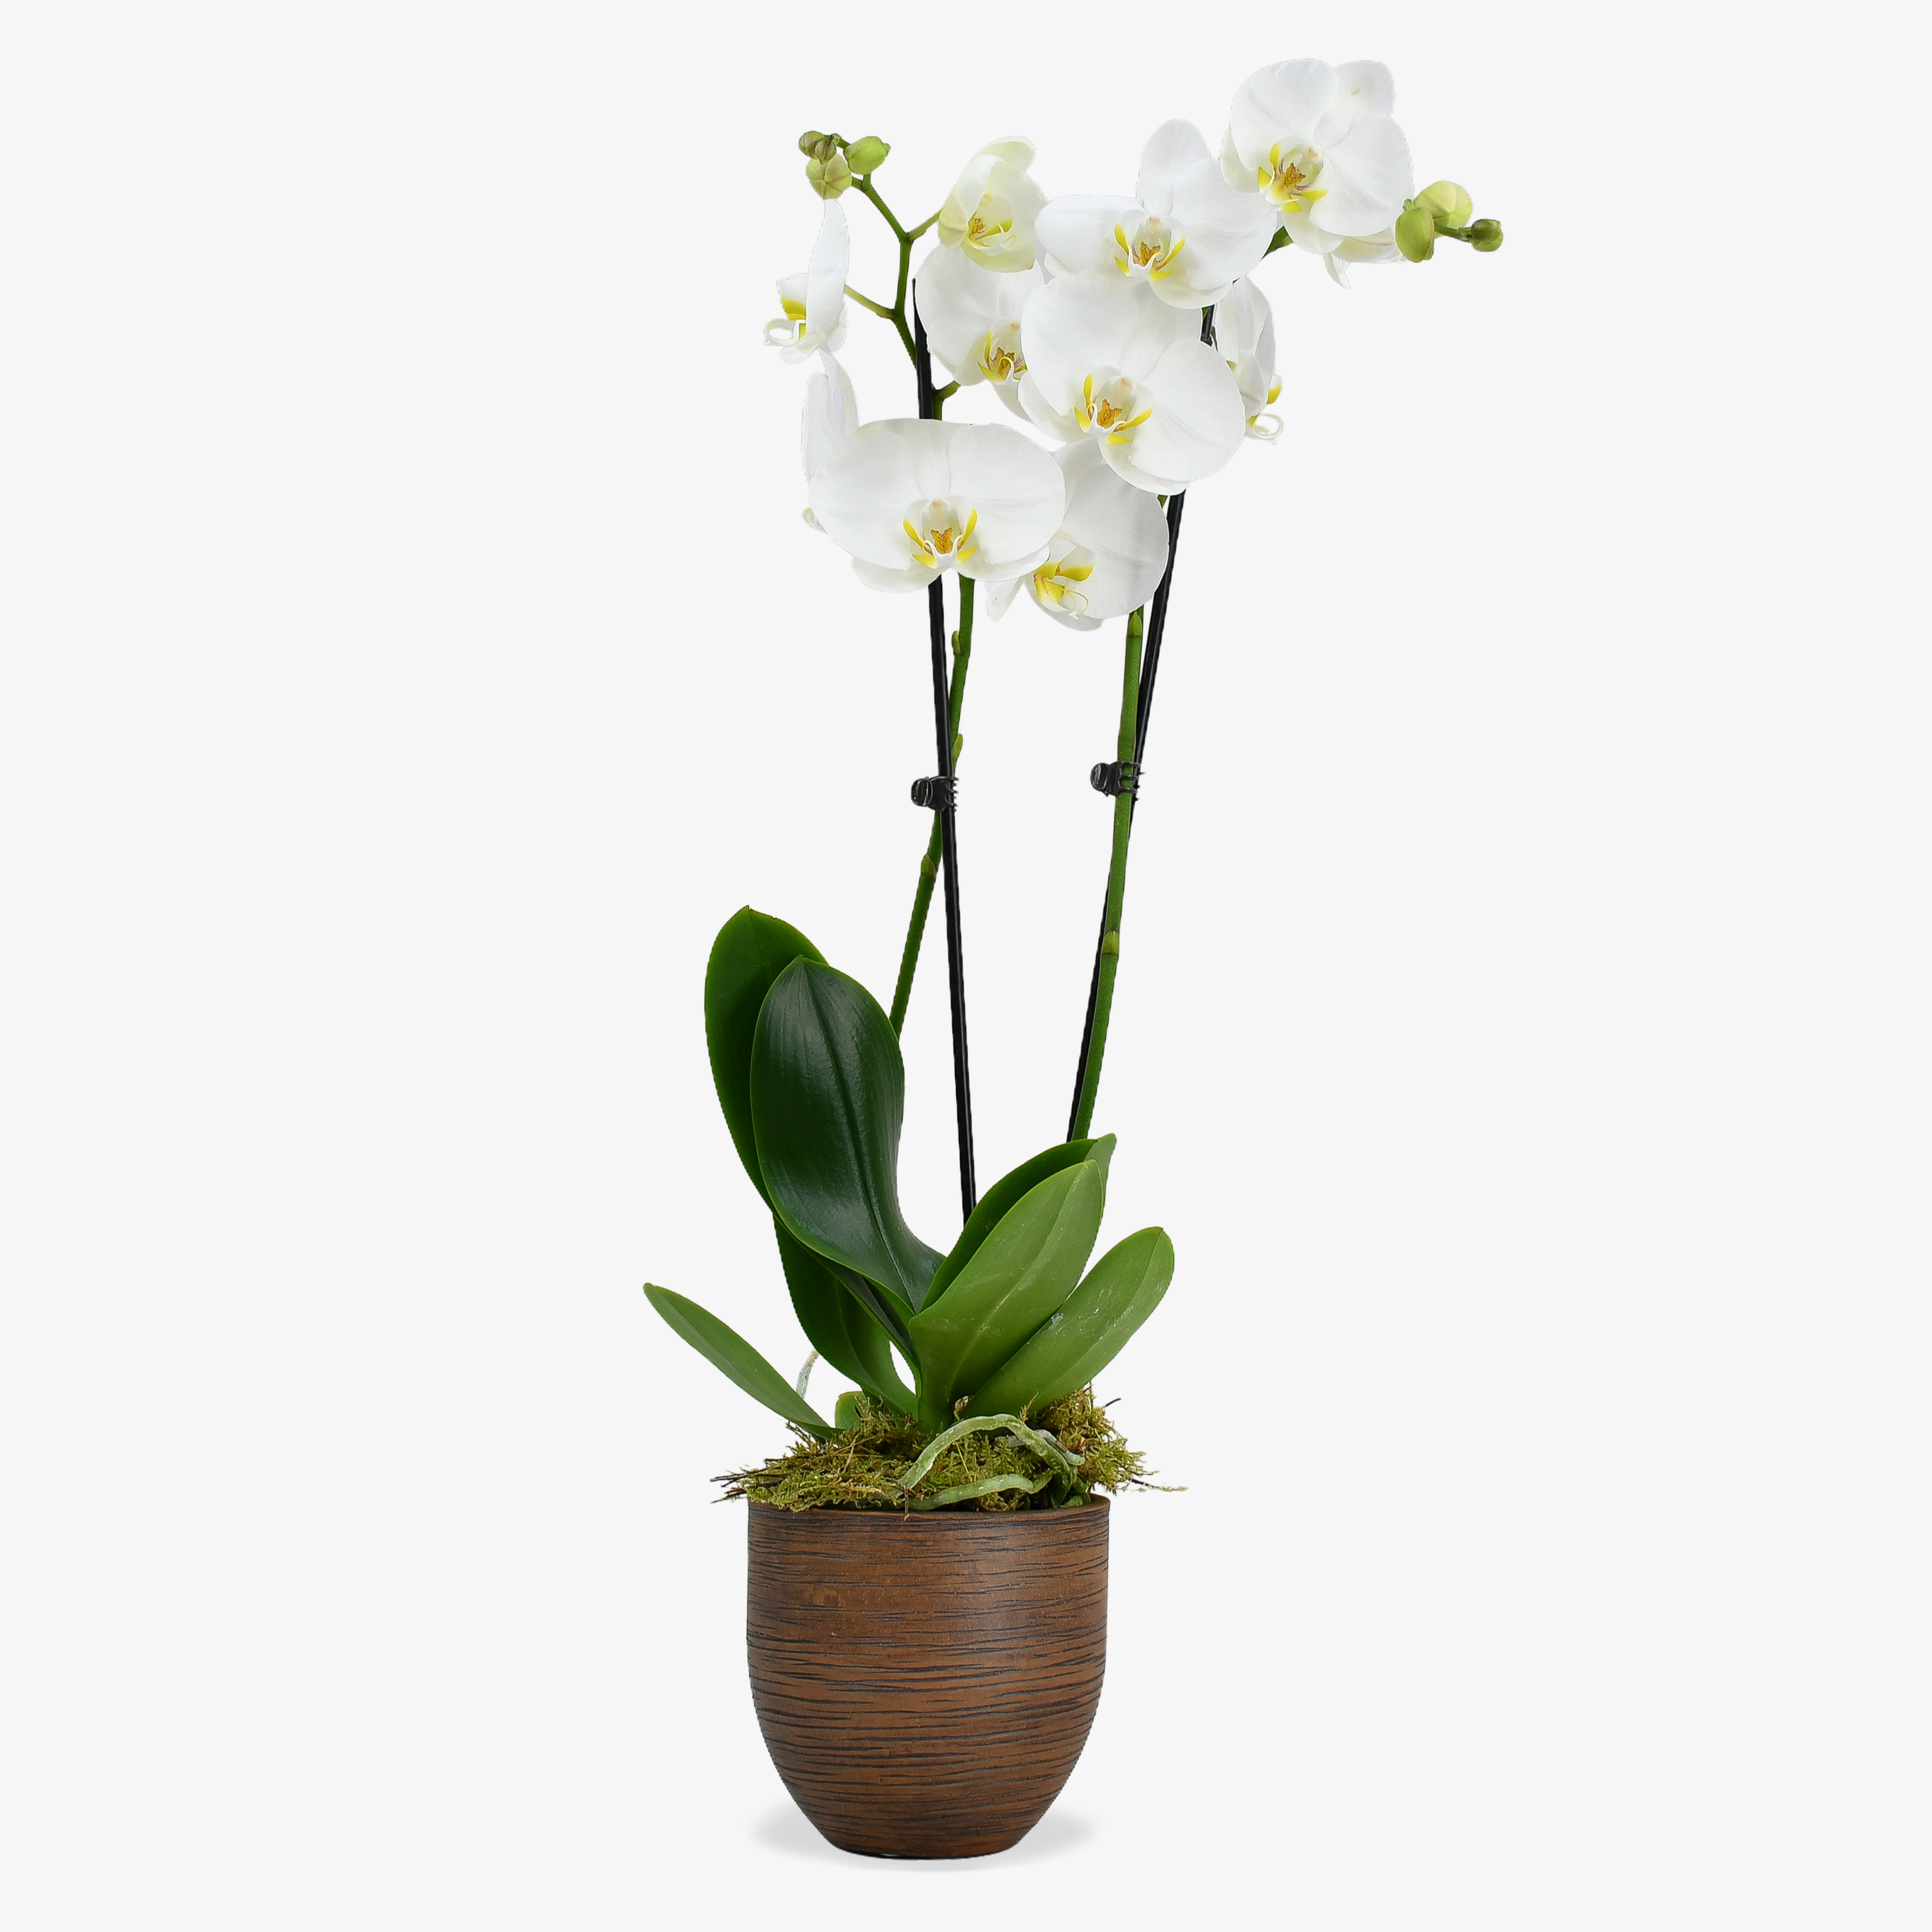 White Orchid image